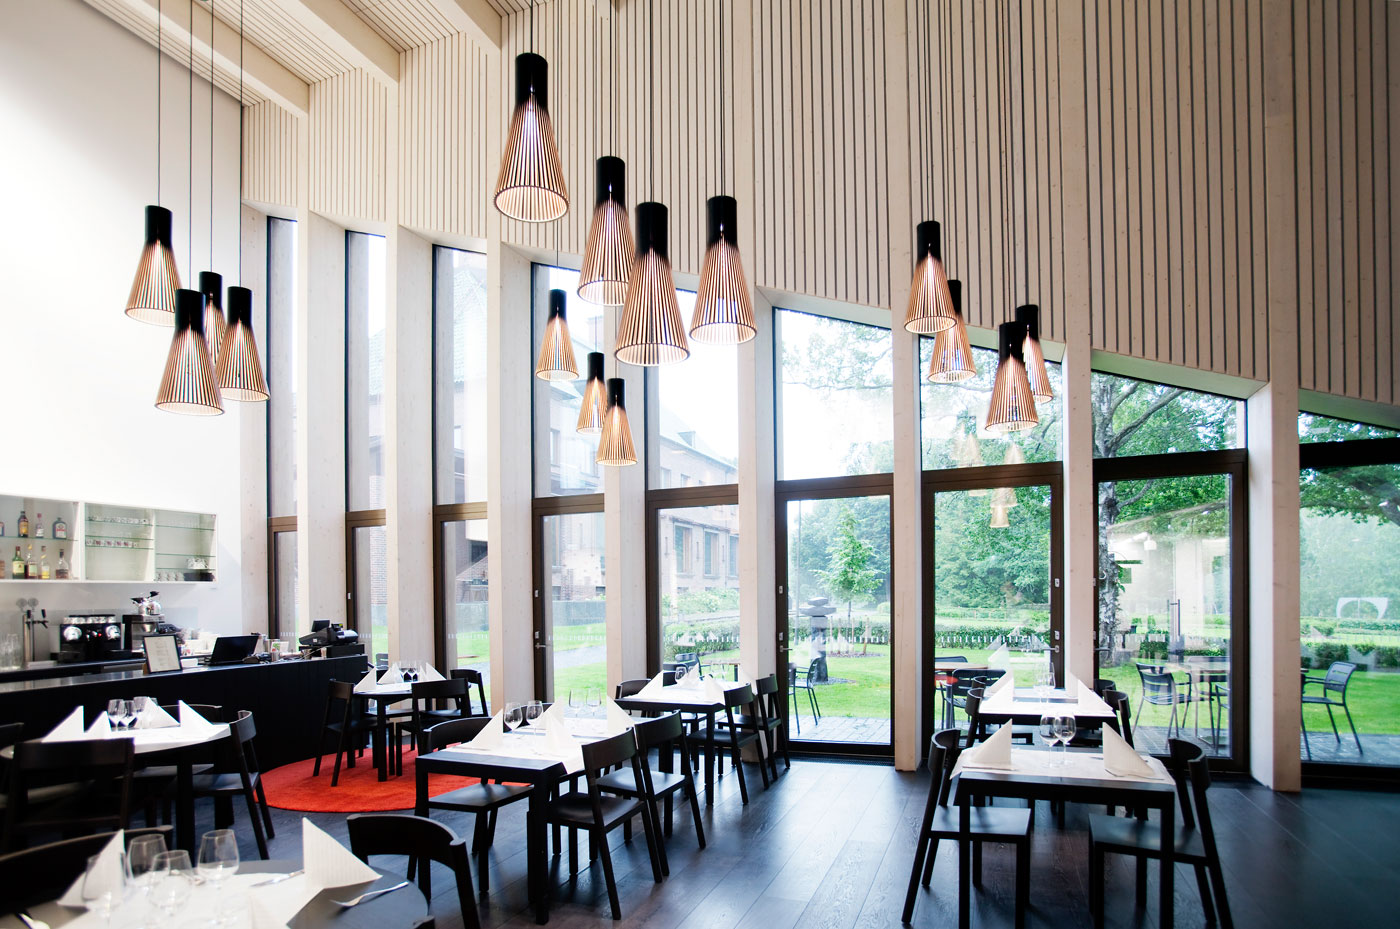 A dining hall with a bar on the left side and large windows towards a garden. Secto pendant lamps hanging above tables.